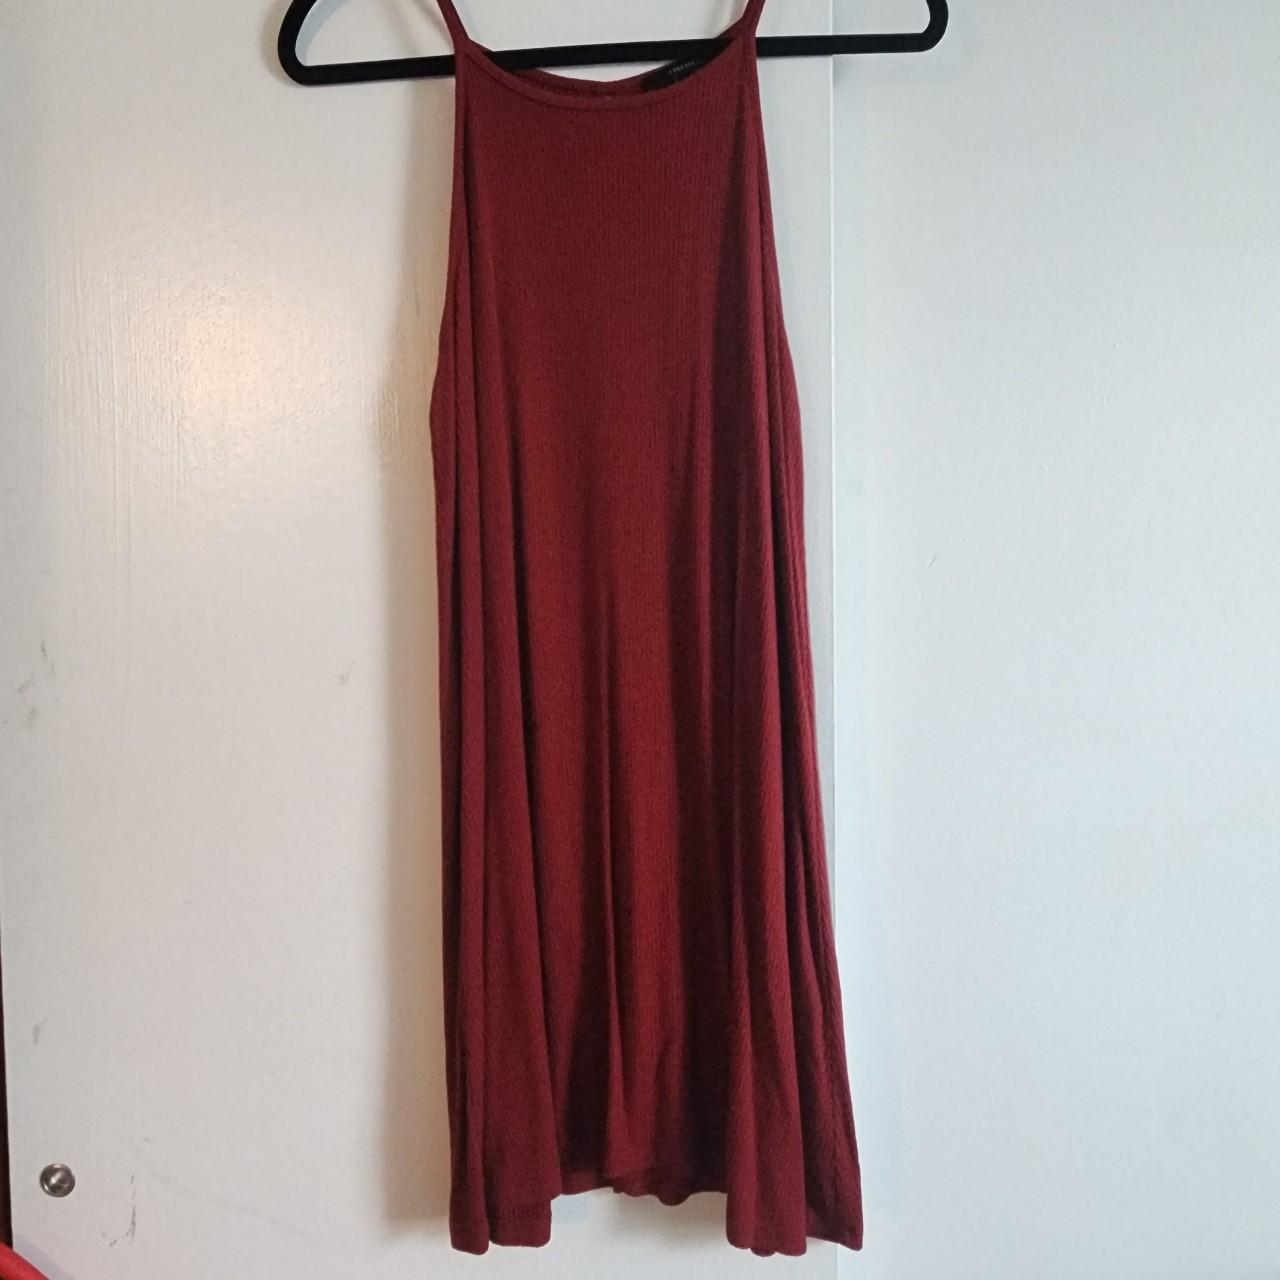 Forever 21 Women's Red and Burgundy Dress